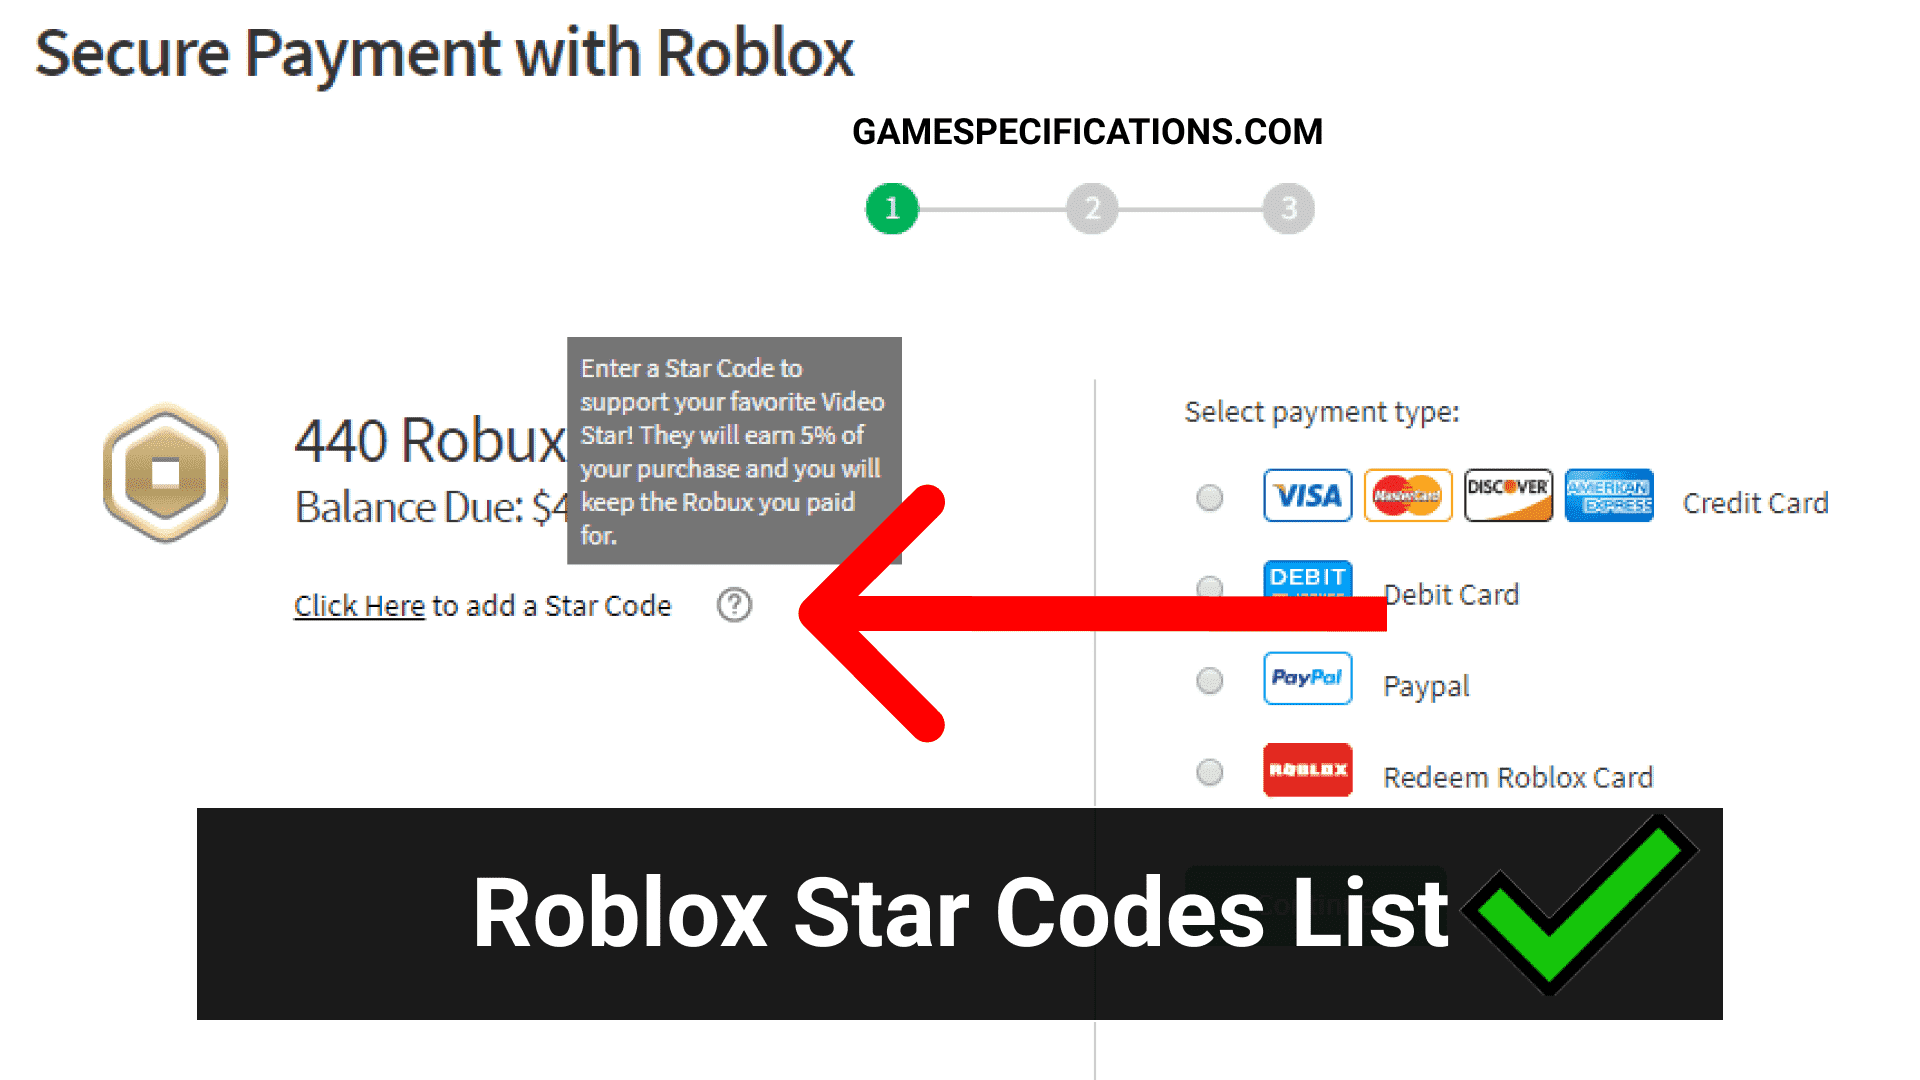 Roblox Star Codes To Get Free Robux